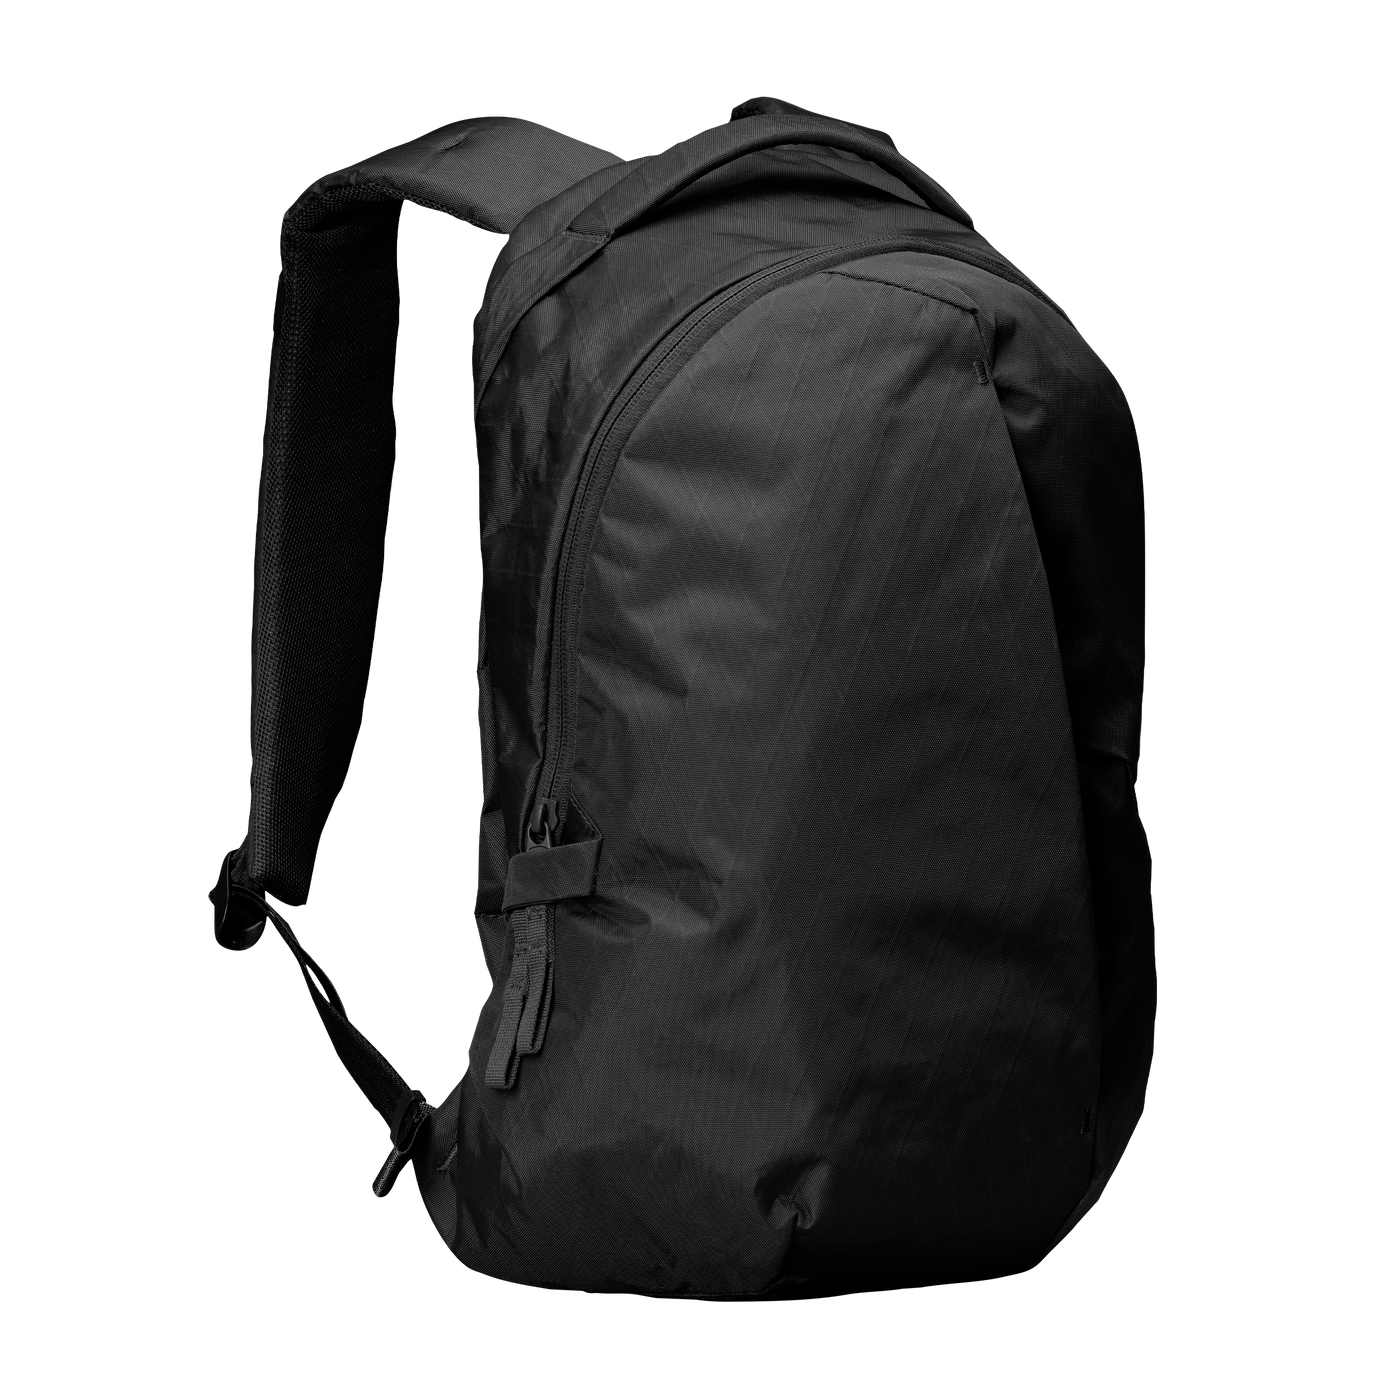 Able Carry - Thirteen Daybag